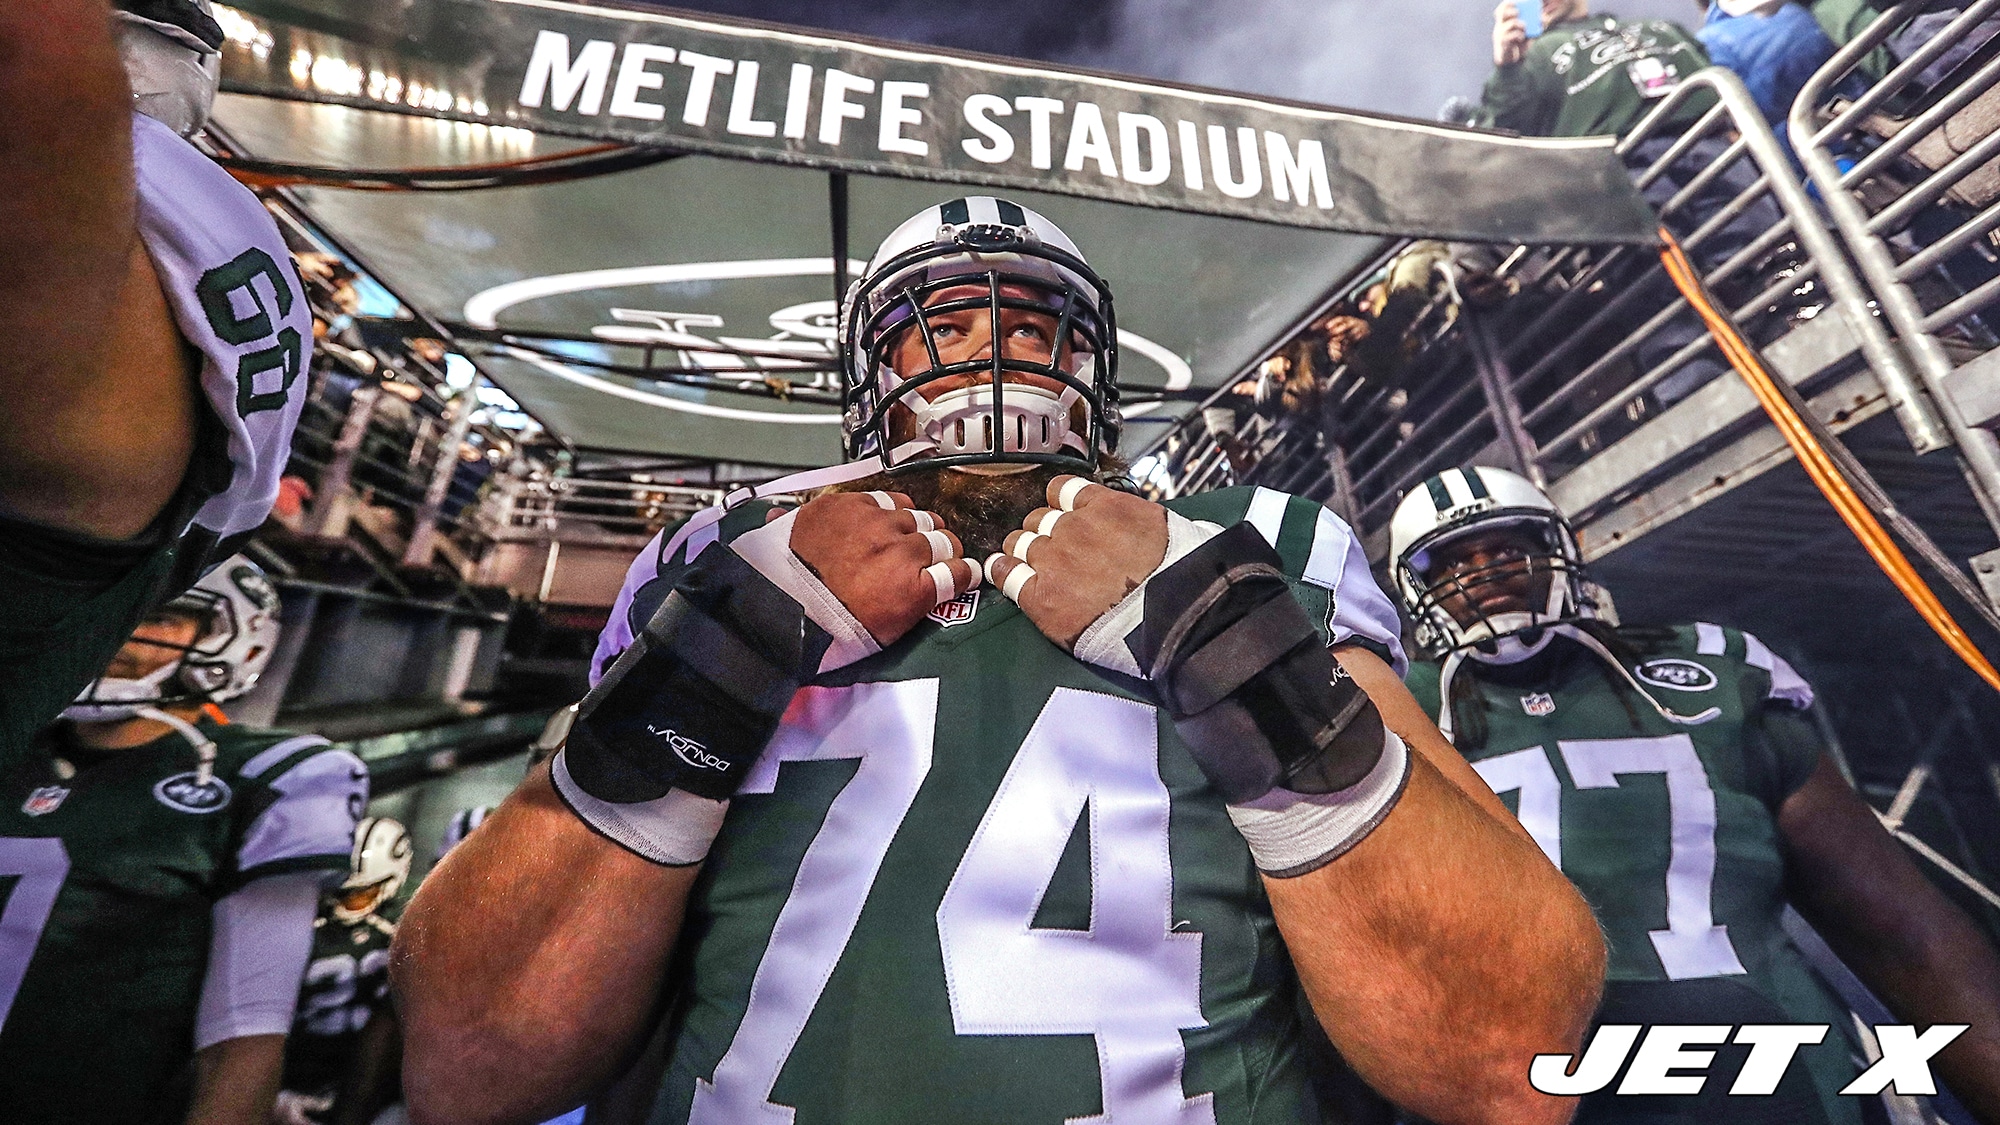 EAST RUTHERFORD, NJ - DECEMBER 05: Nick Mangold #74 of the New York Jets waits to be introduced against the Indianapolis Colts before their game at MetLife Stadium on December 5, 2016 in East Rutherford, New Jersey.